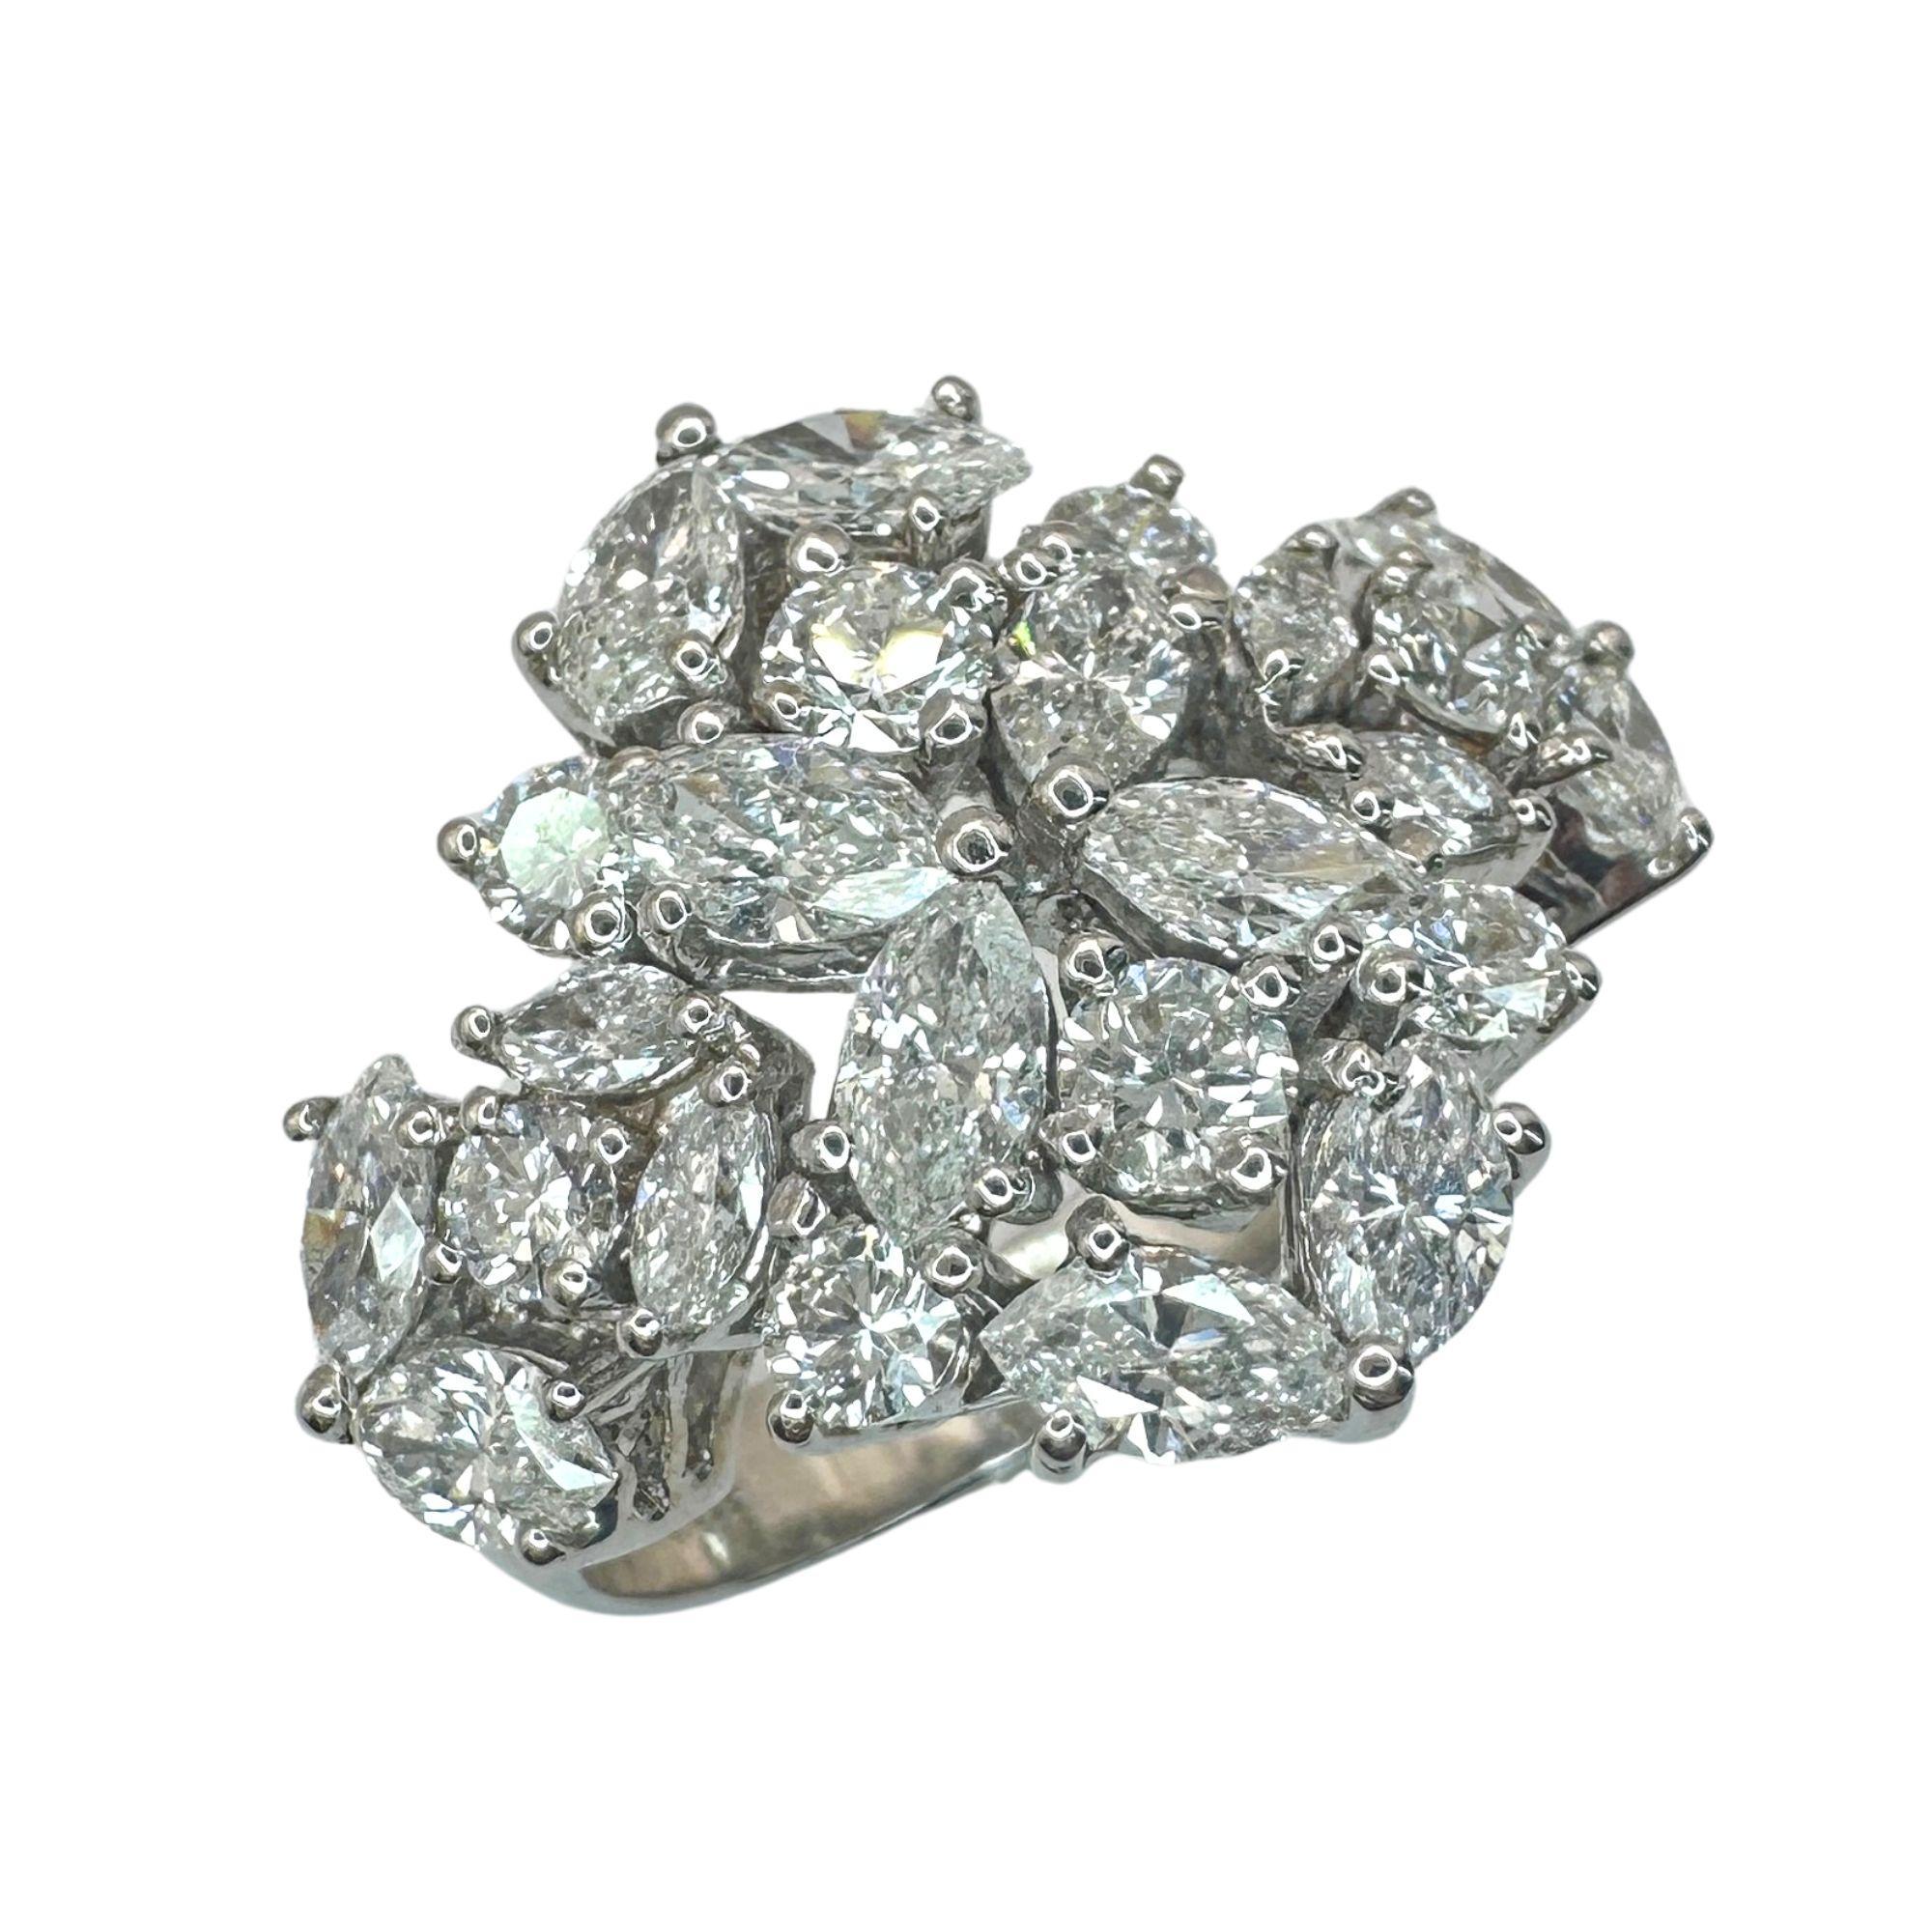 This 18k White Gold Marquise Cut Diamond Ring is a timeless piece in good condition. With 1.99 carats of marquise cut diamonds and 0.74 carats of diamond accents, it is sure to make a statement. Weighing 7.4 grams and marked with 